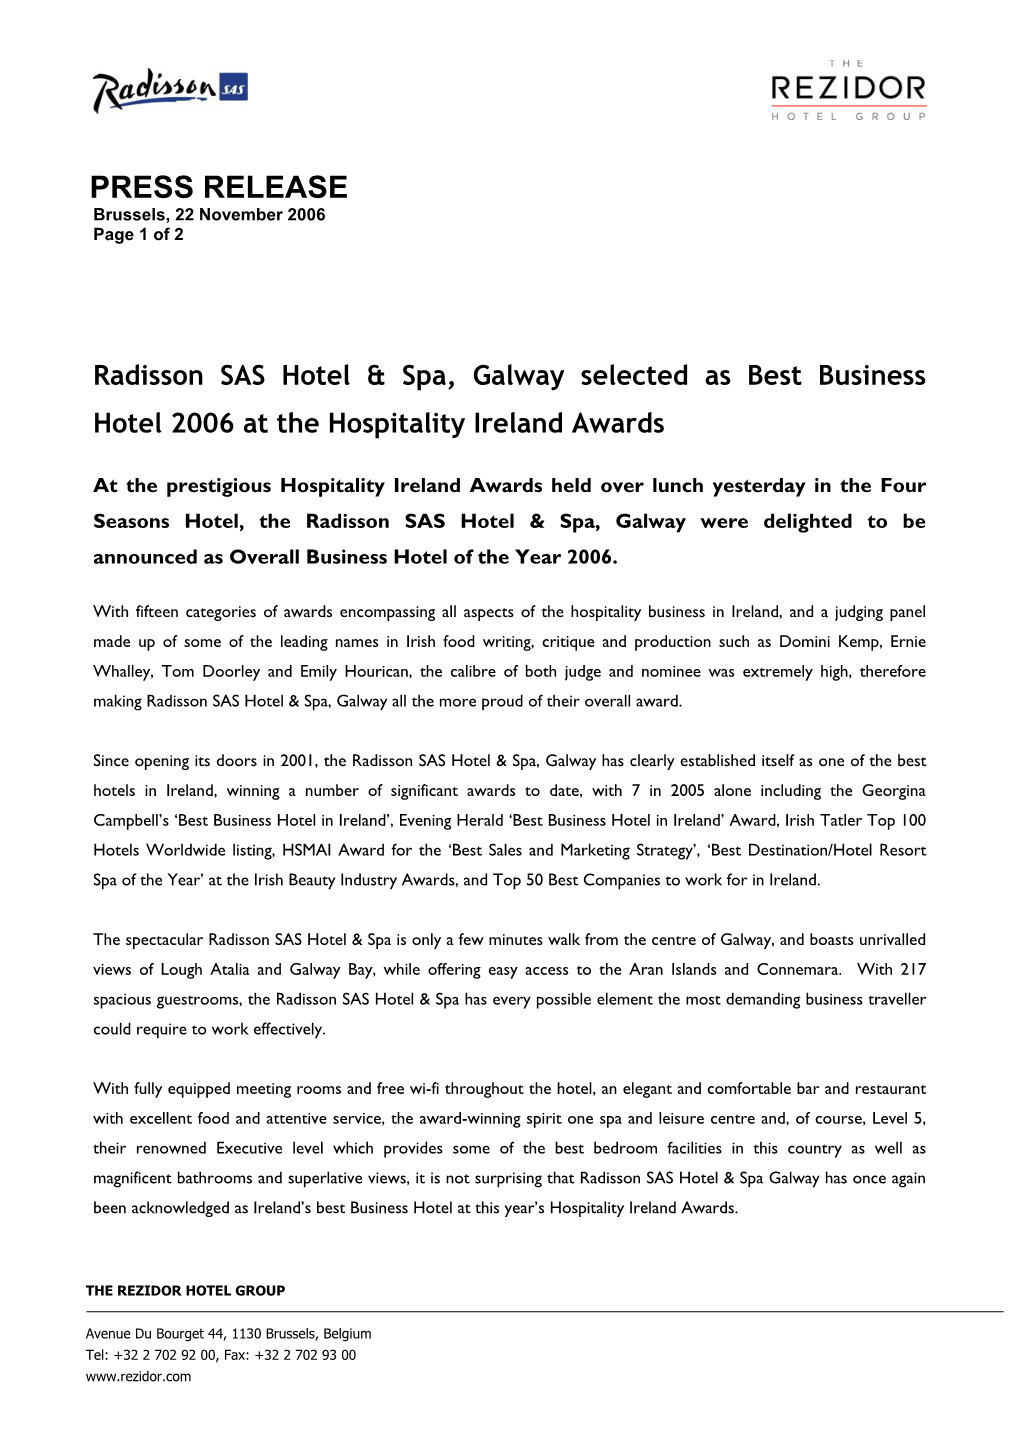 Radisson SAS Hotel & Spa, Galway Selected As Best Business Hotel 2006 at the Hospitality Ireland Awards